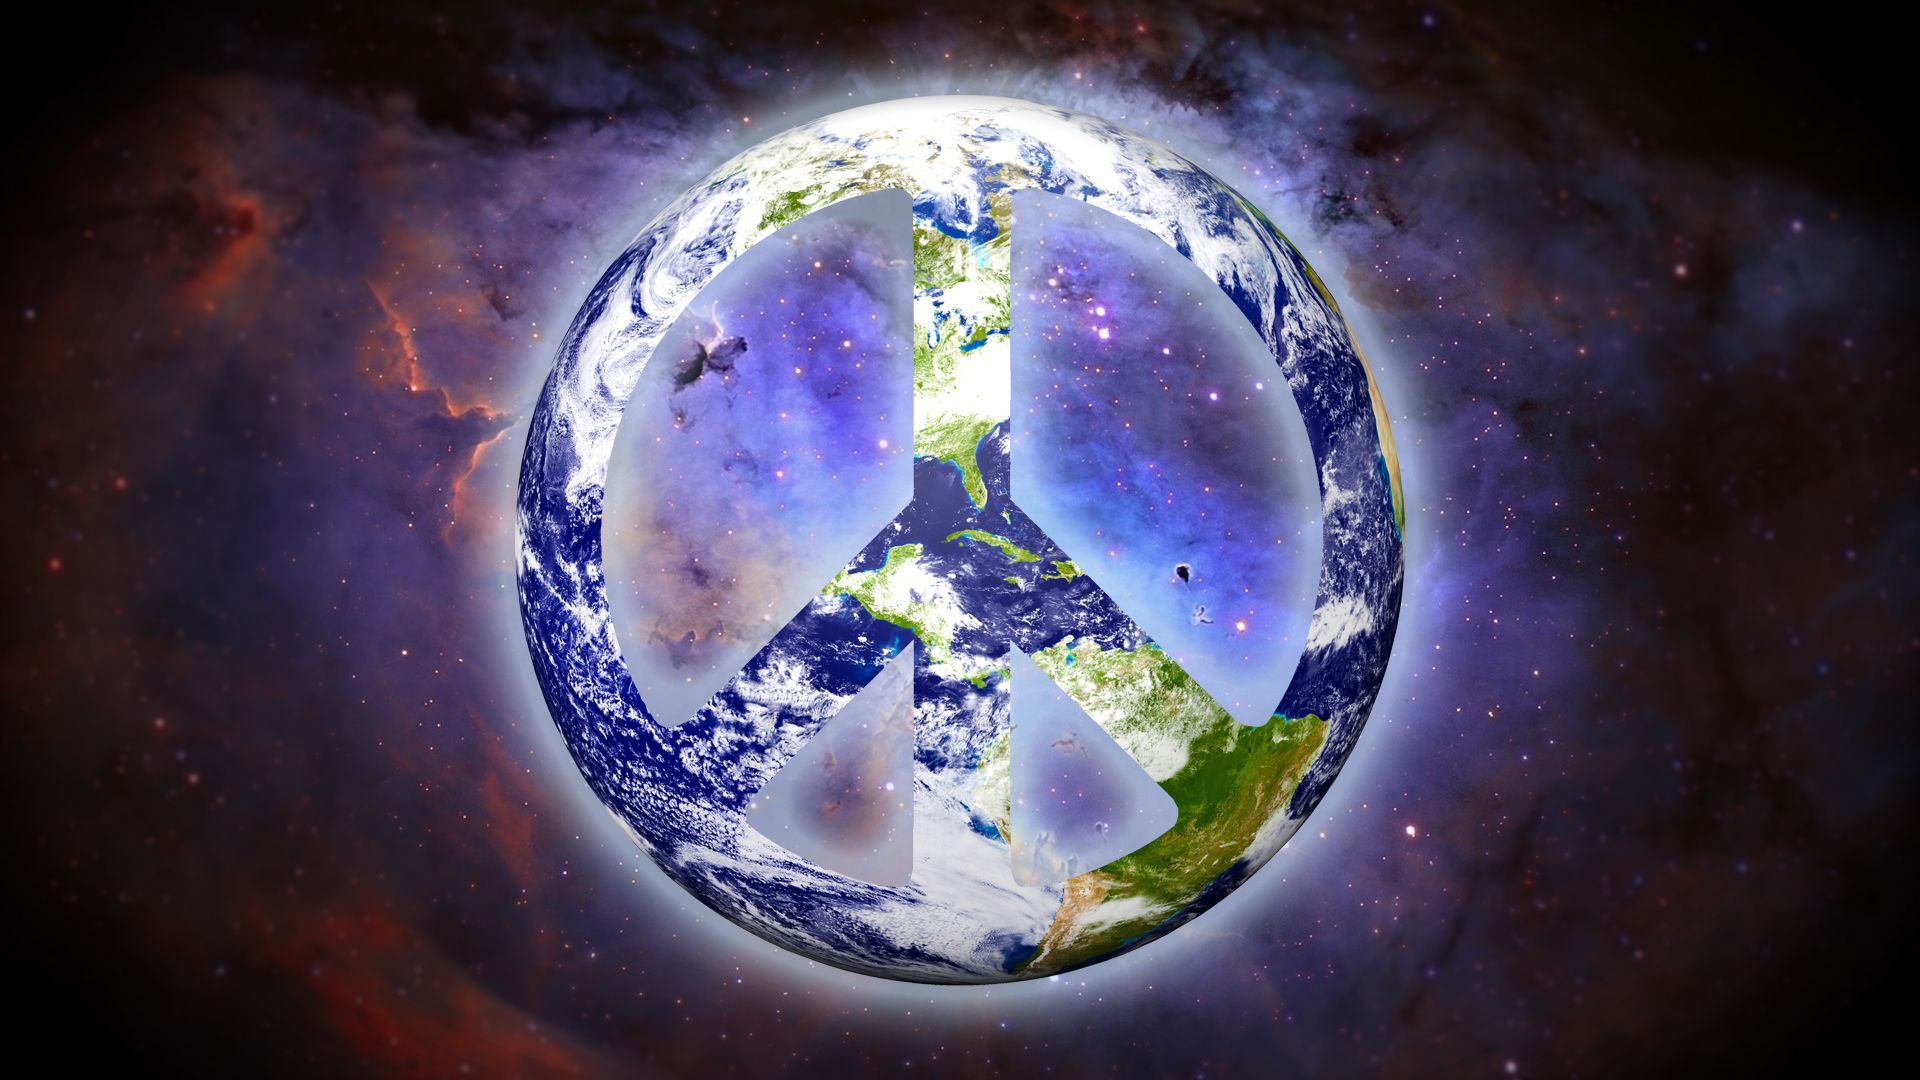 World Peace Wallpapers   Wallpaper Zone 1920x1080